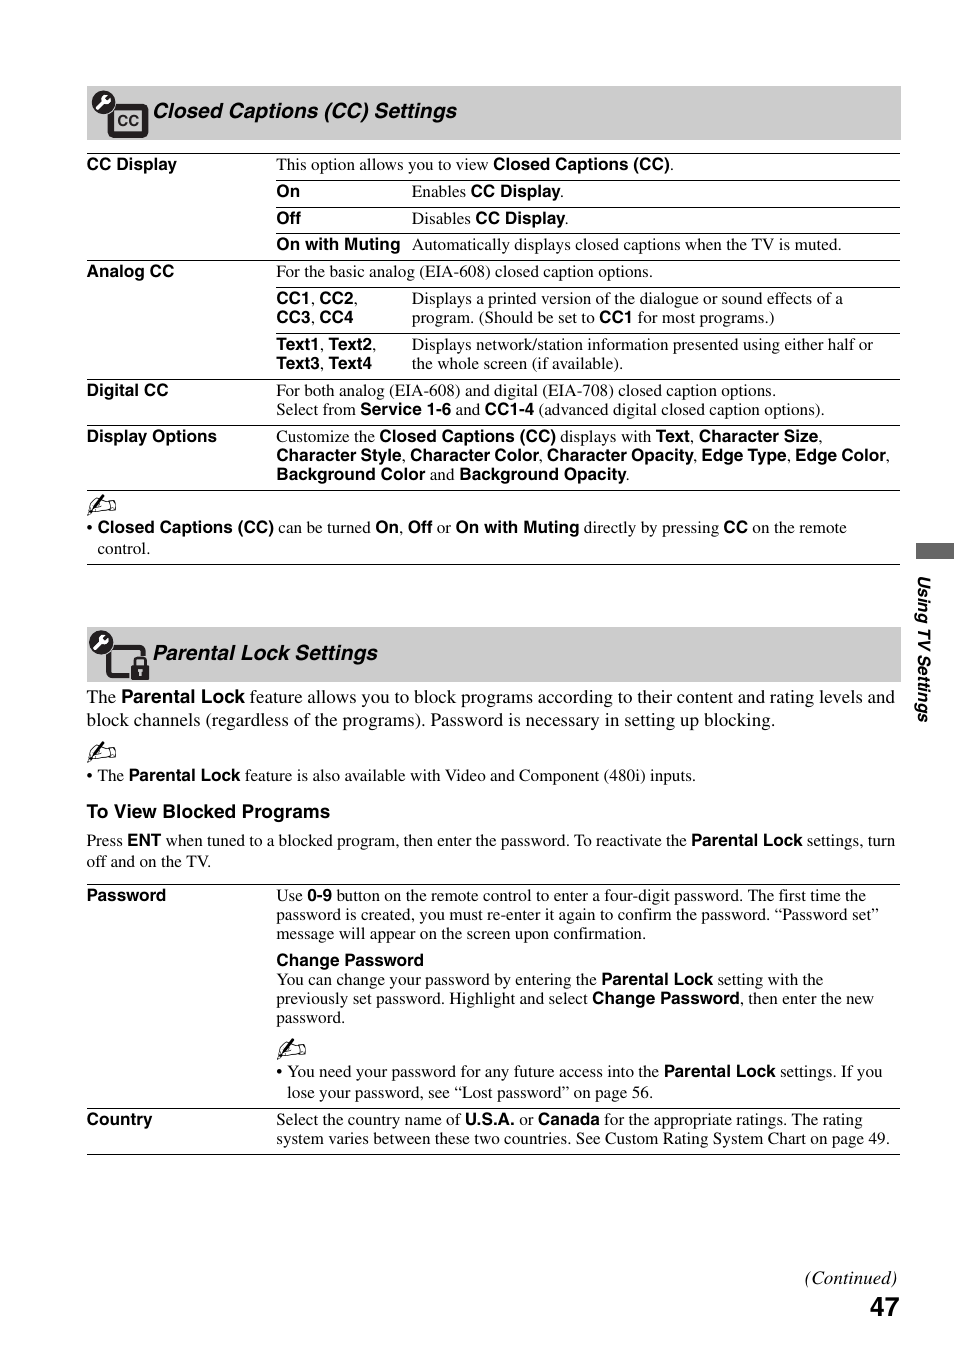 Closed captions (cc) settings, Parental lock settings | Sony KDL-52XBR7 User Manual | Page 47 / 60